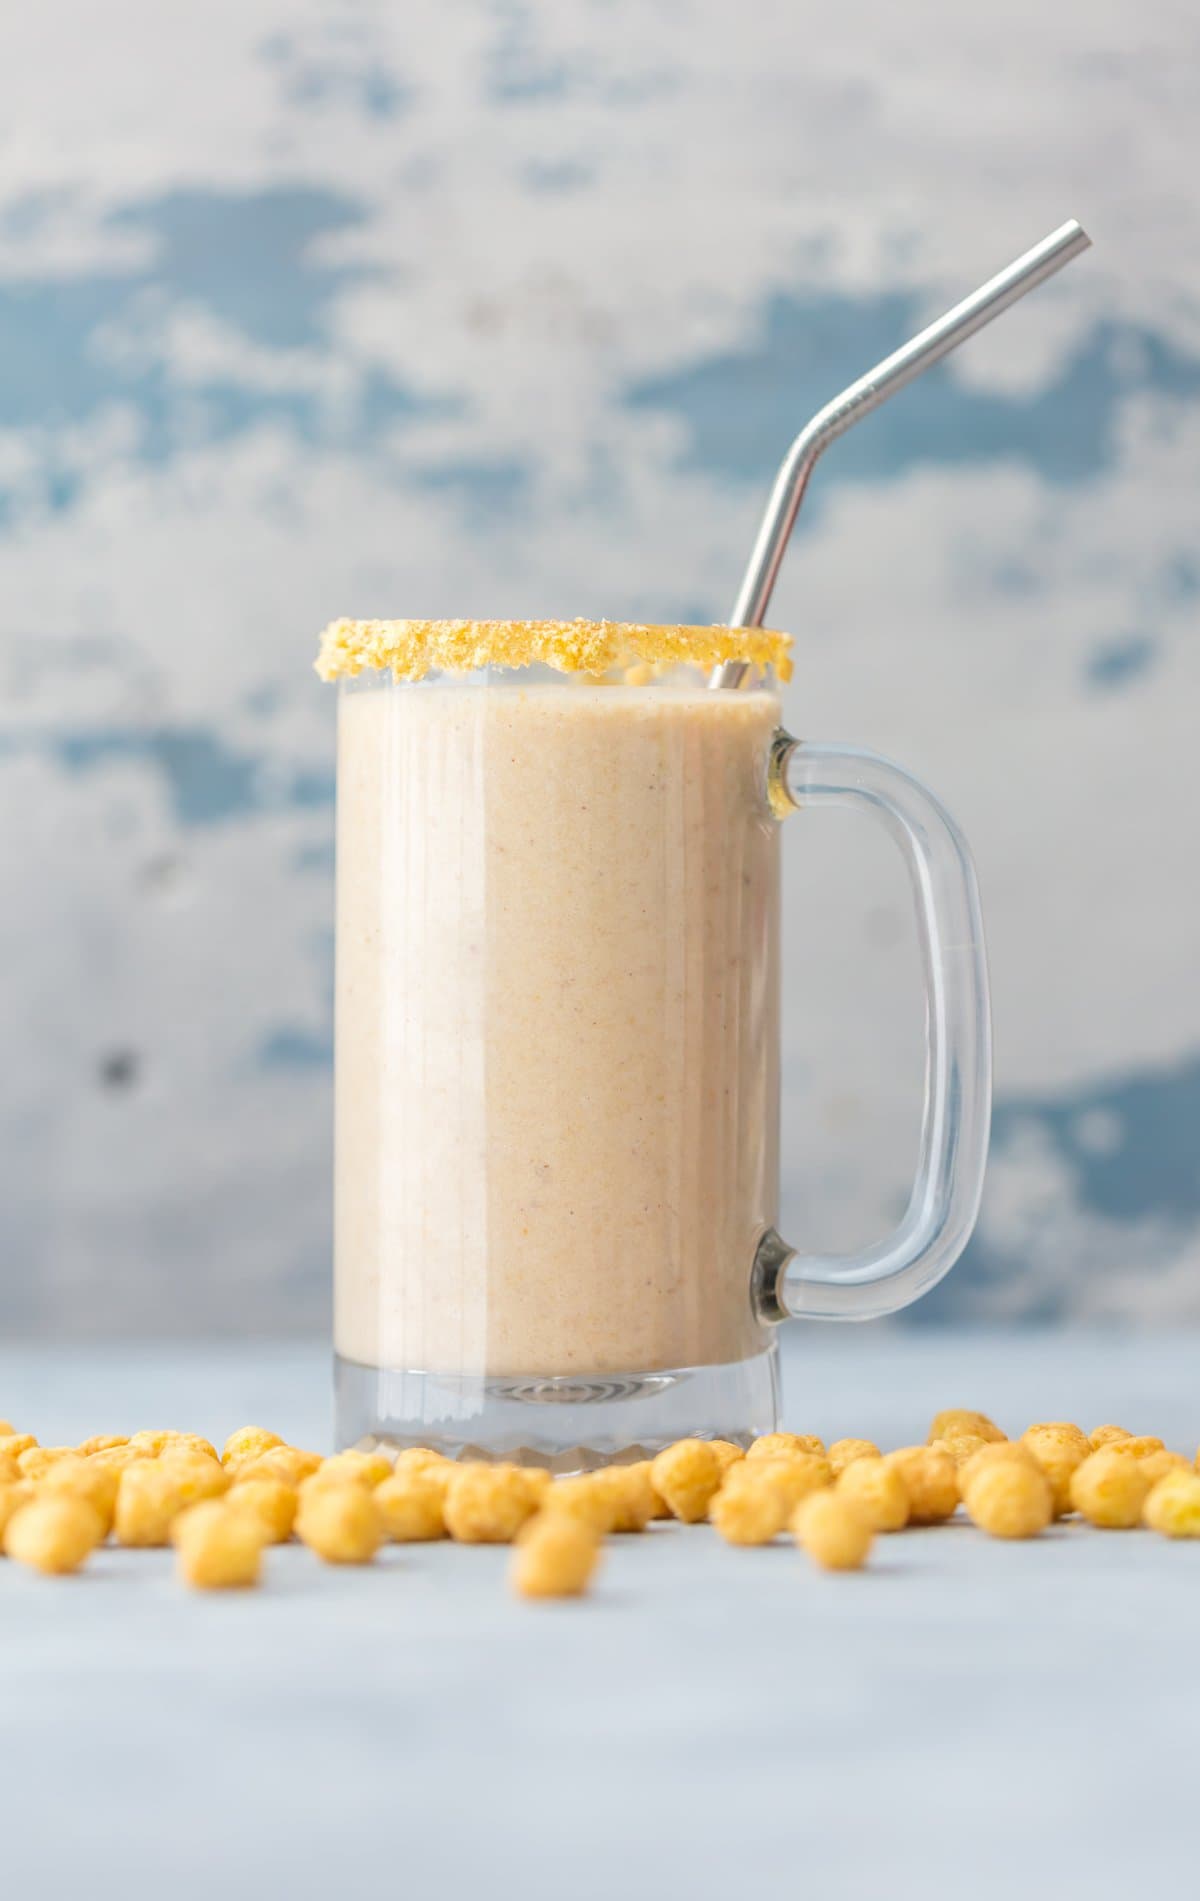 Peanut Butter and banana smoothie made with breakfast cereal